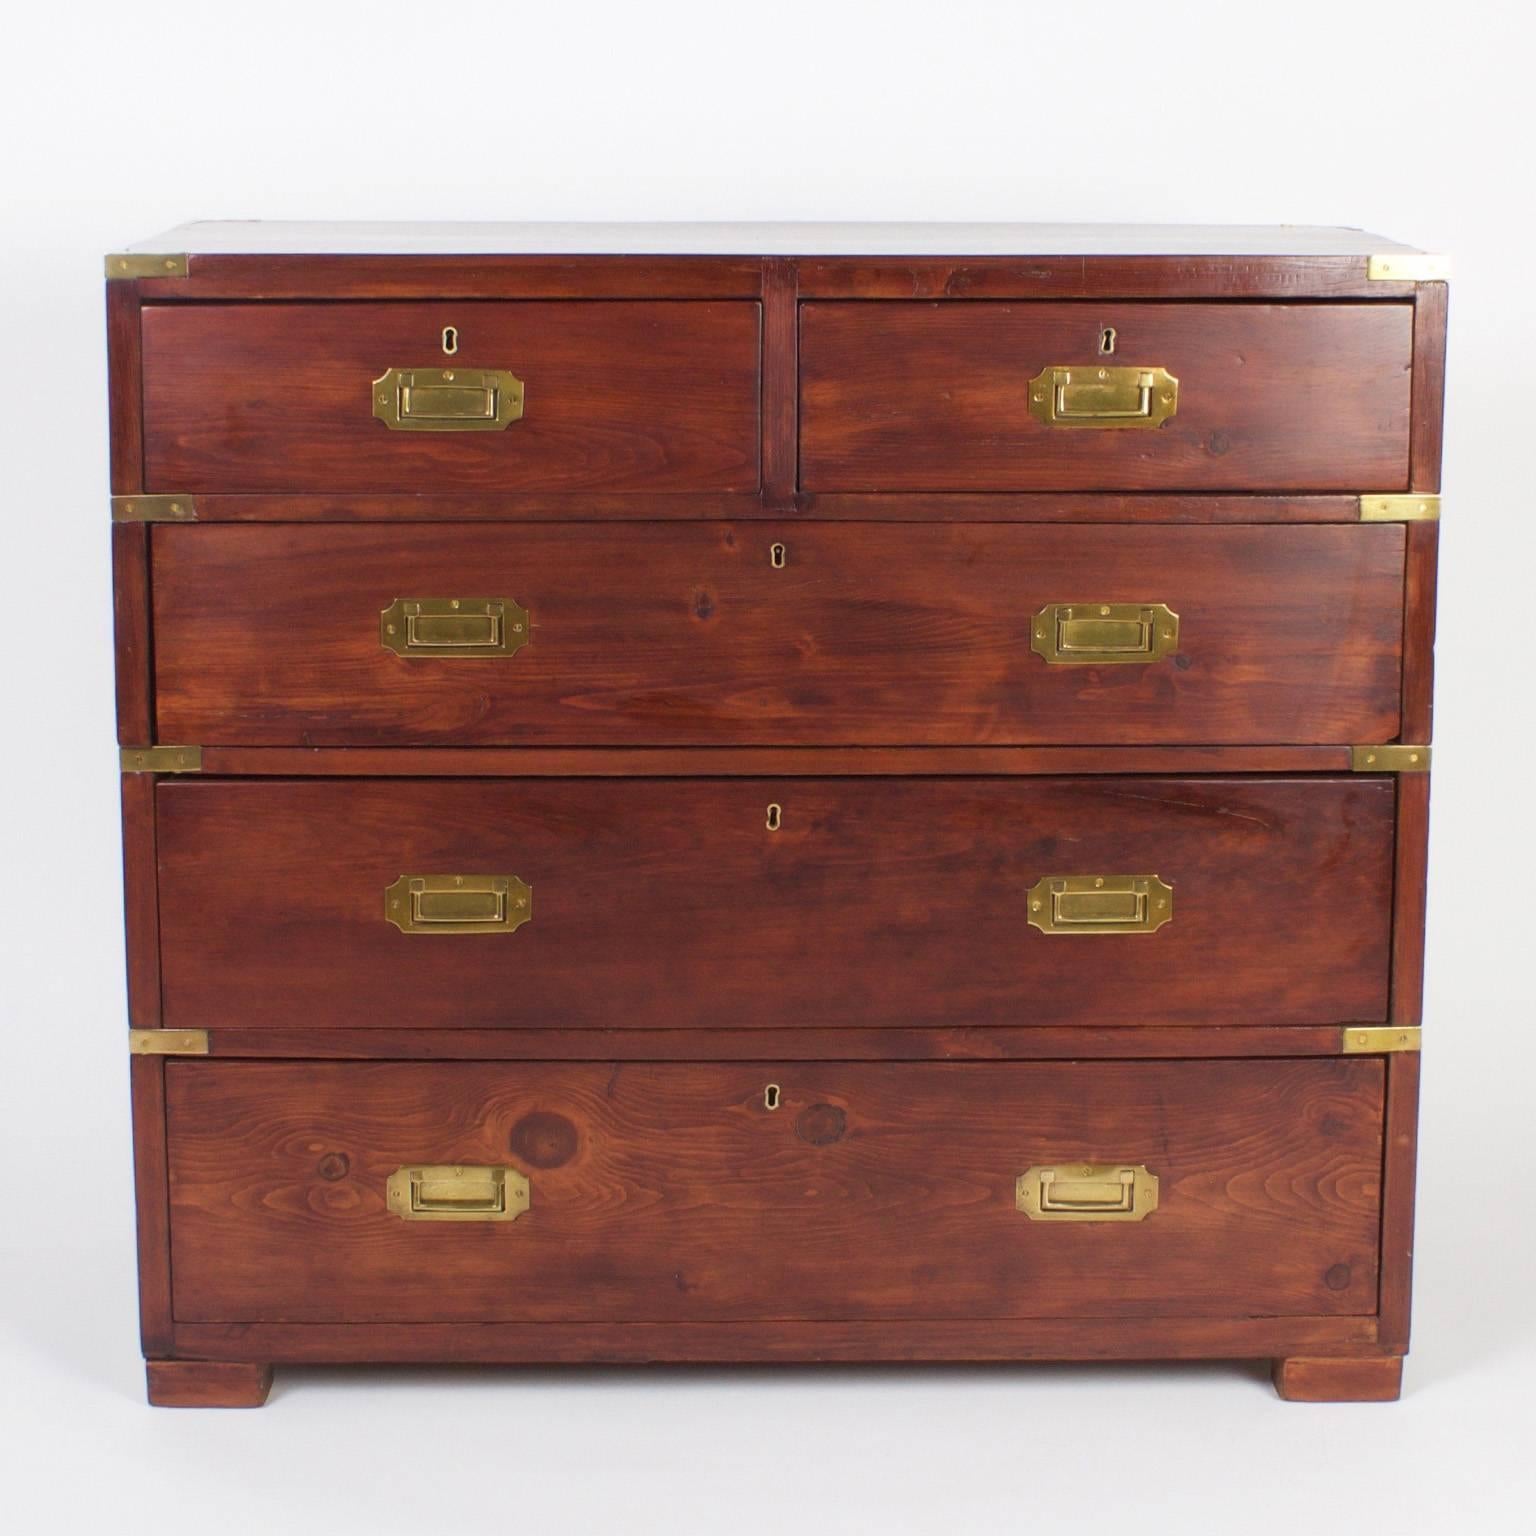 Antique English five-drawer pine Campaign chest with plenty of history and rustic appeal. Featuring classic simple lines and brass Campaign style hardware. Newly polished.

                          